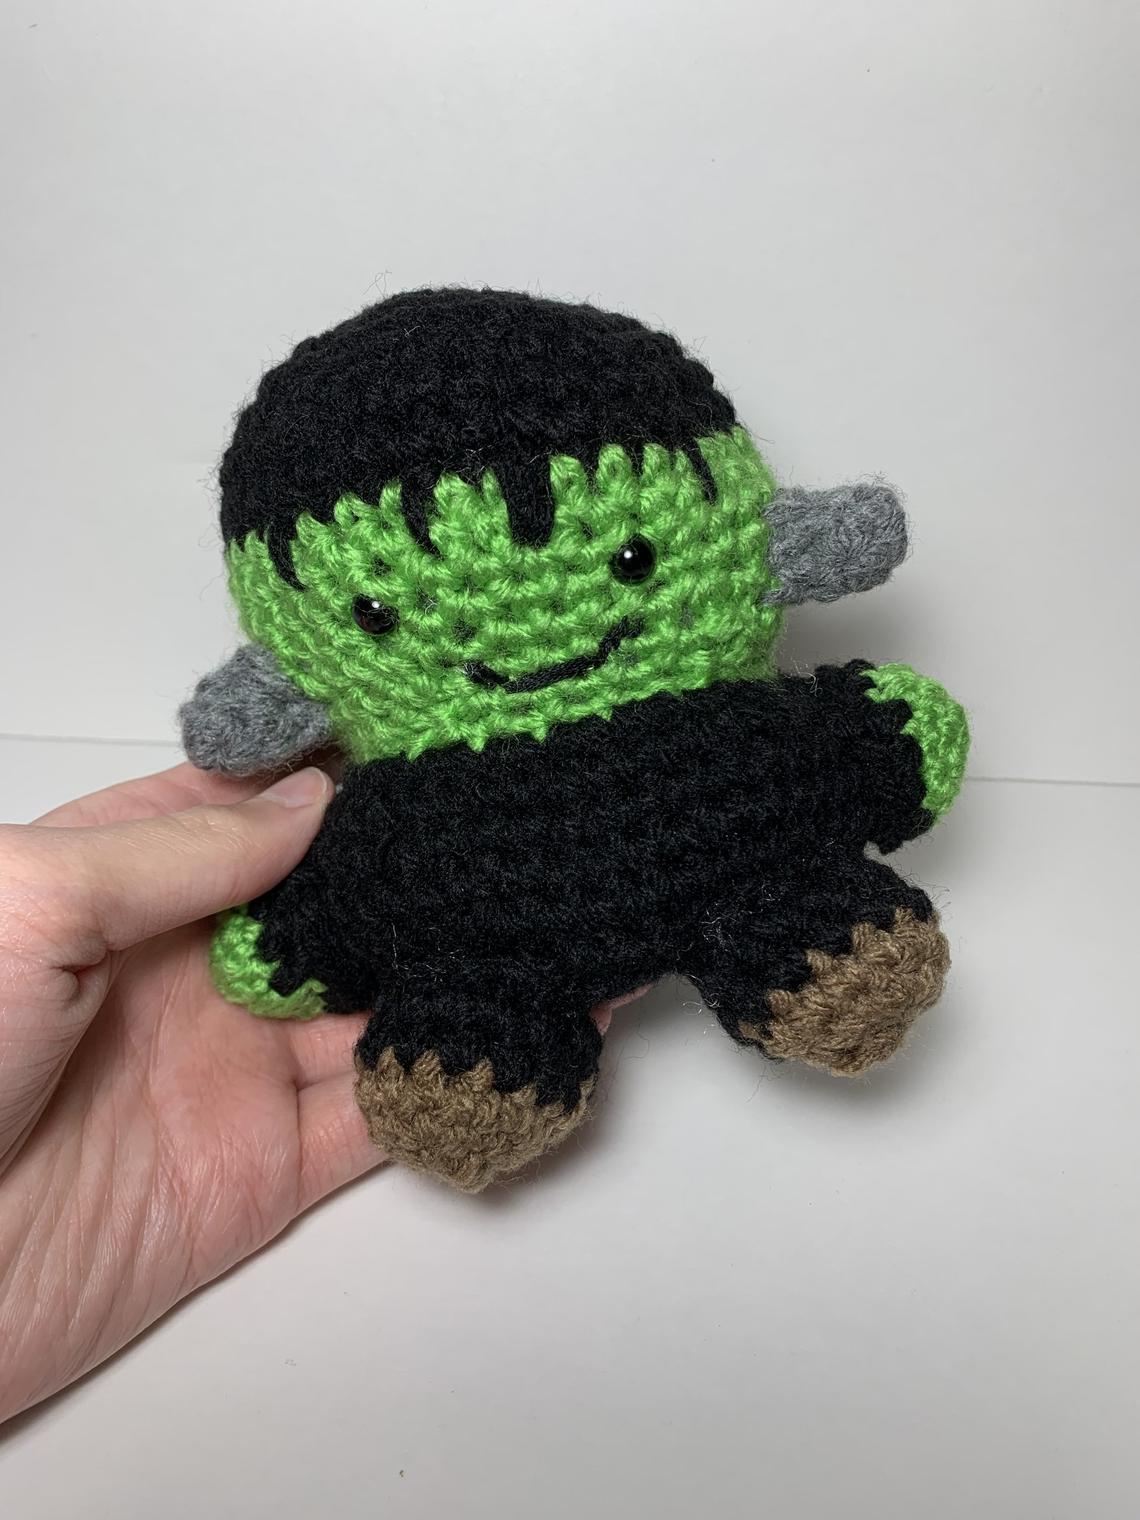 Crocheted Frankenstein Stuffed Toy (for Halloween and fall) (decor or toy)